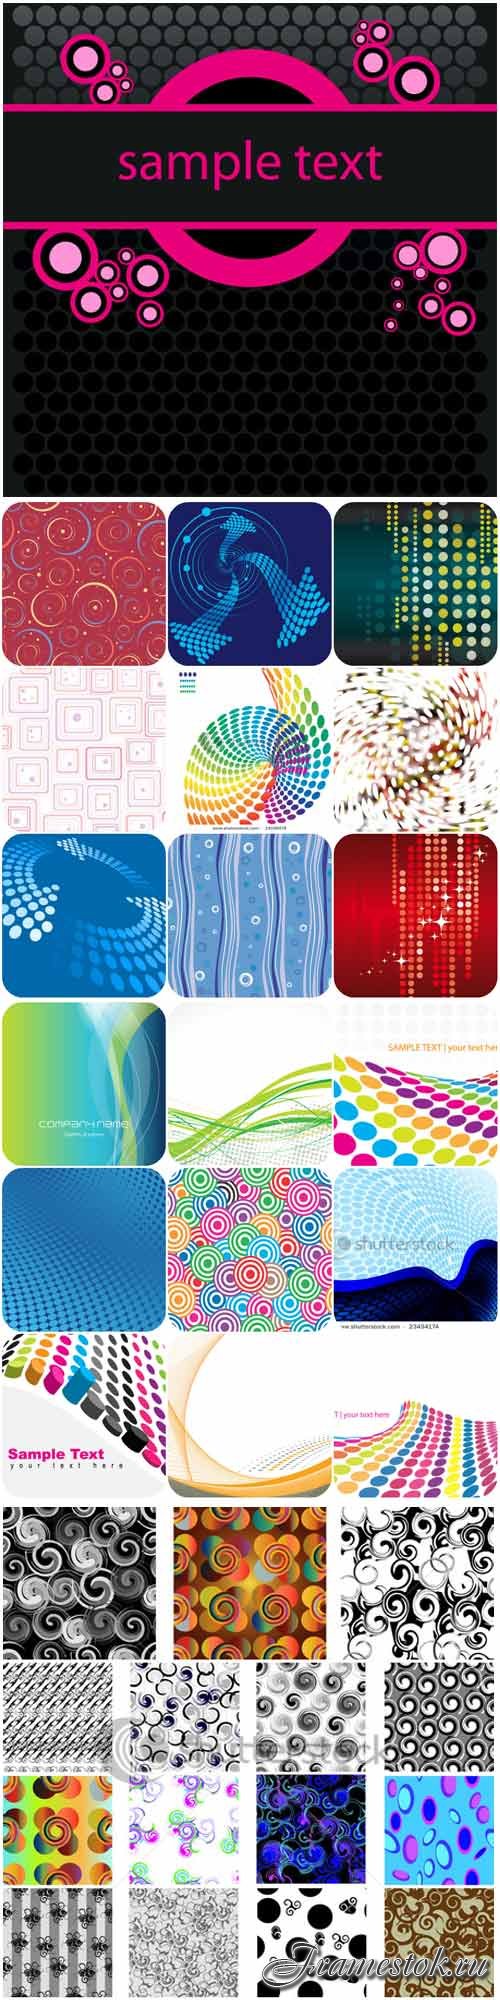 Abstract patterns backgrounds stock vector - 2